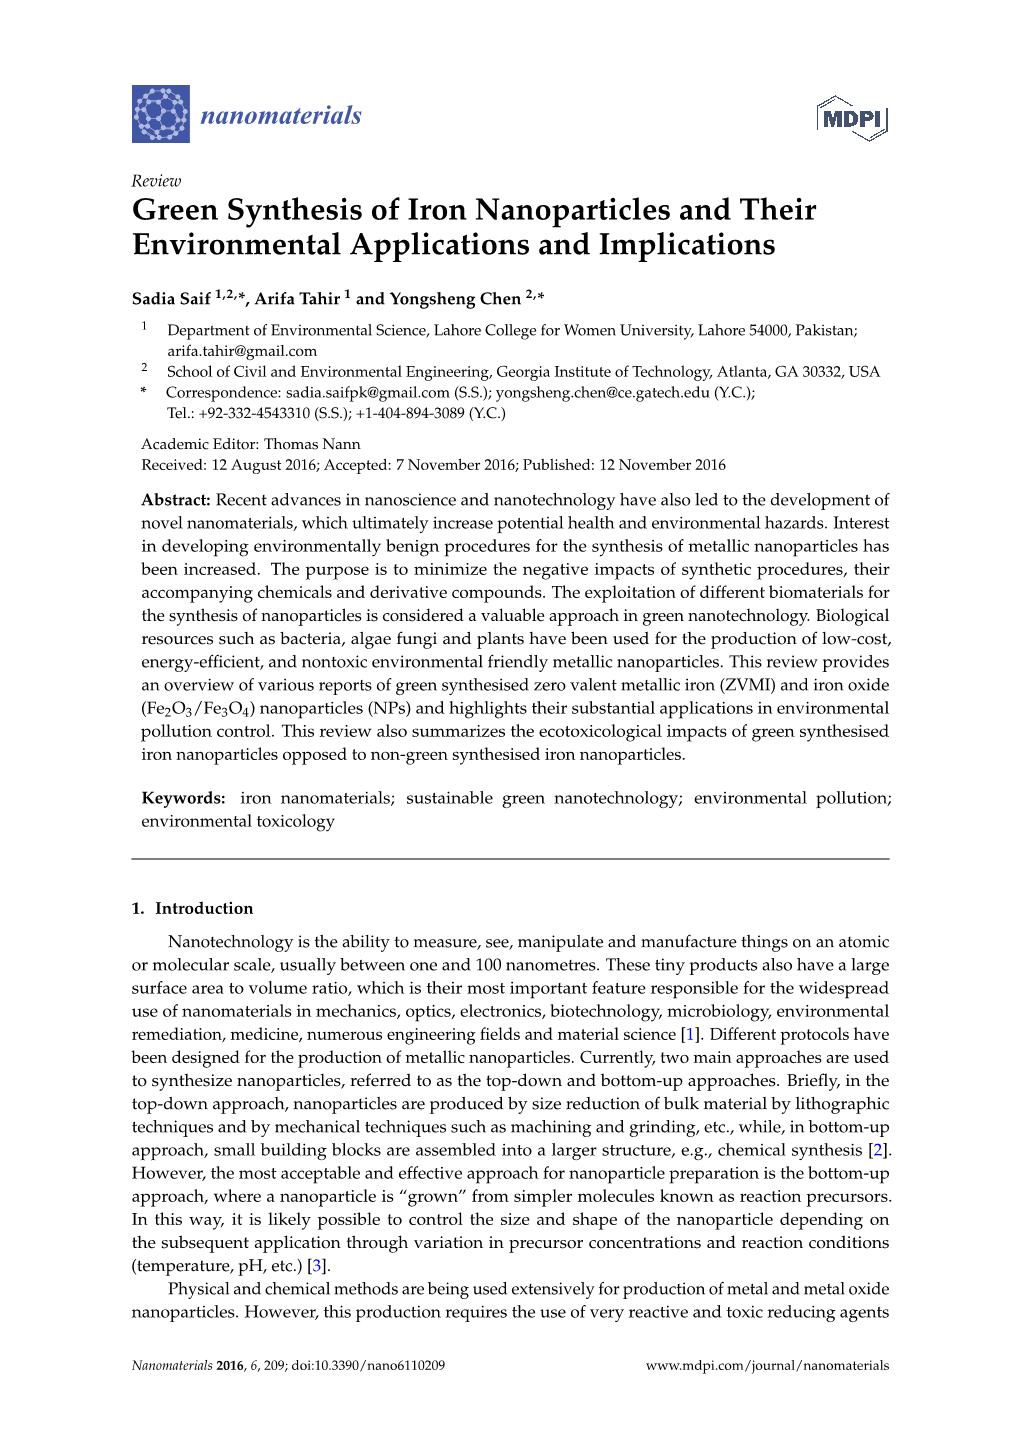 Green Synthesis of Iron Nanoparticles and Their Environmental Applications and Implications